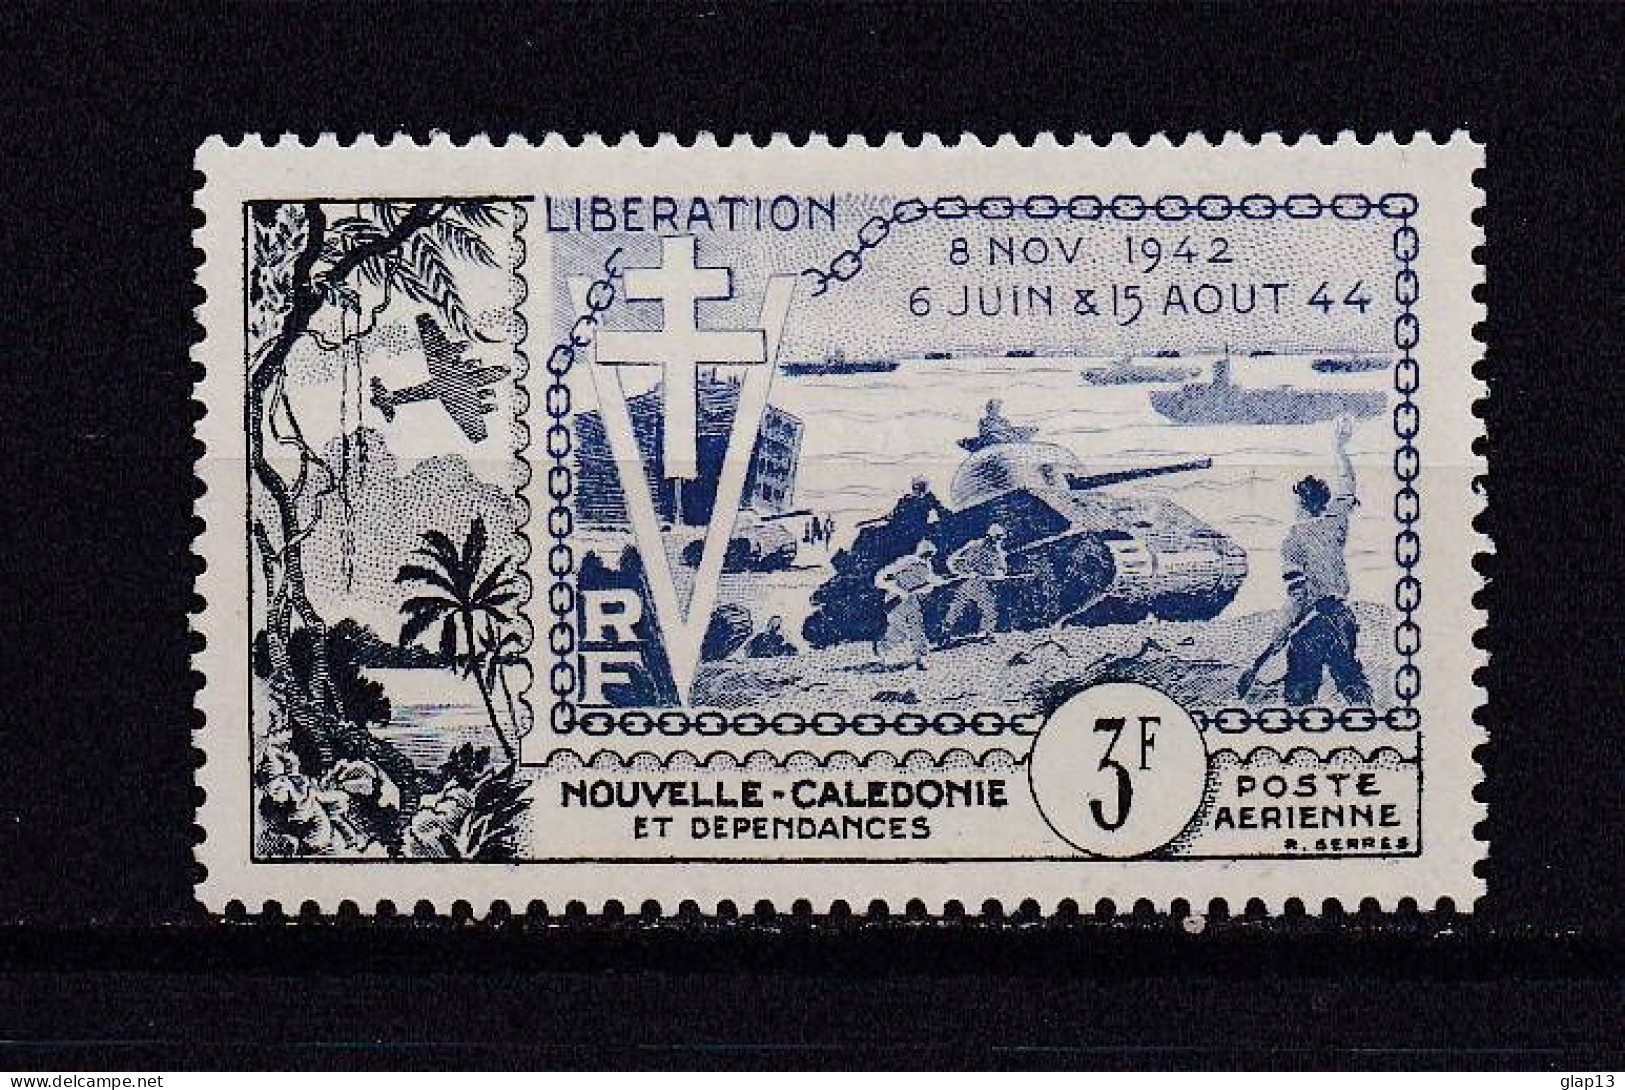 NOUVELLE-CALEDONIE 1954 PA N°65 NEUF AVEC CHARNIERE LIBERATION - Nuevos